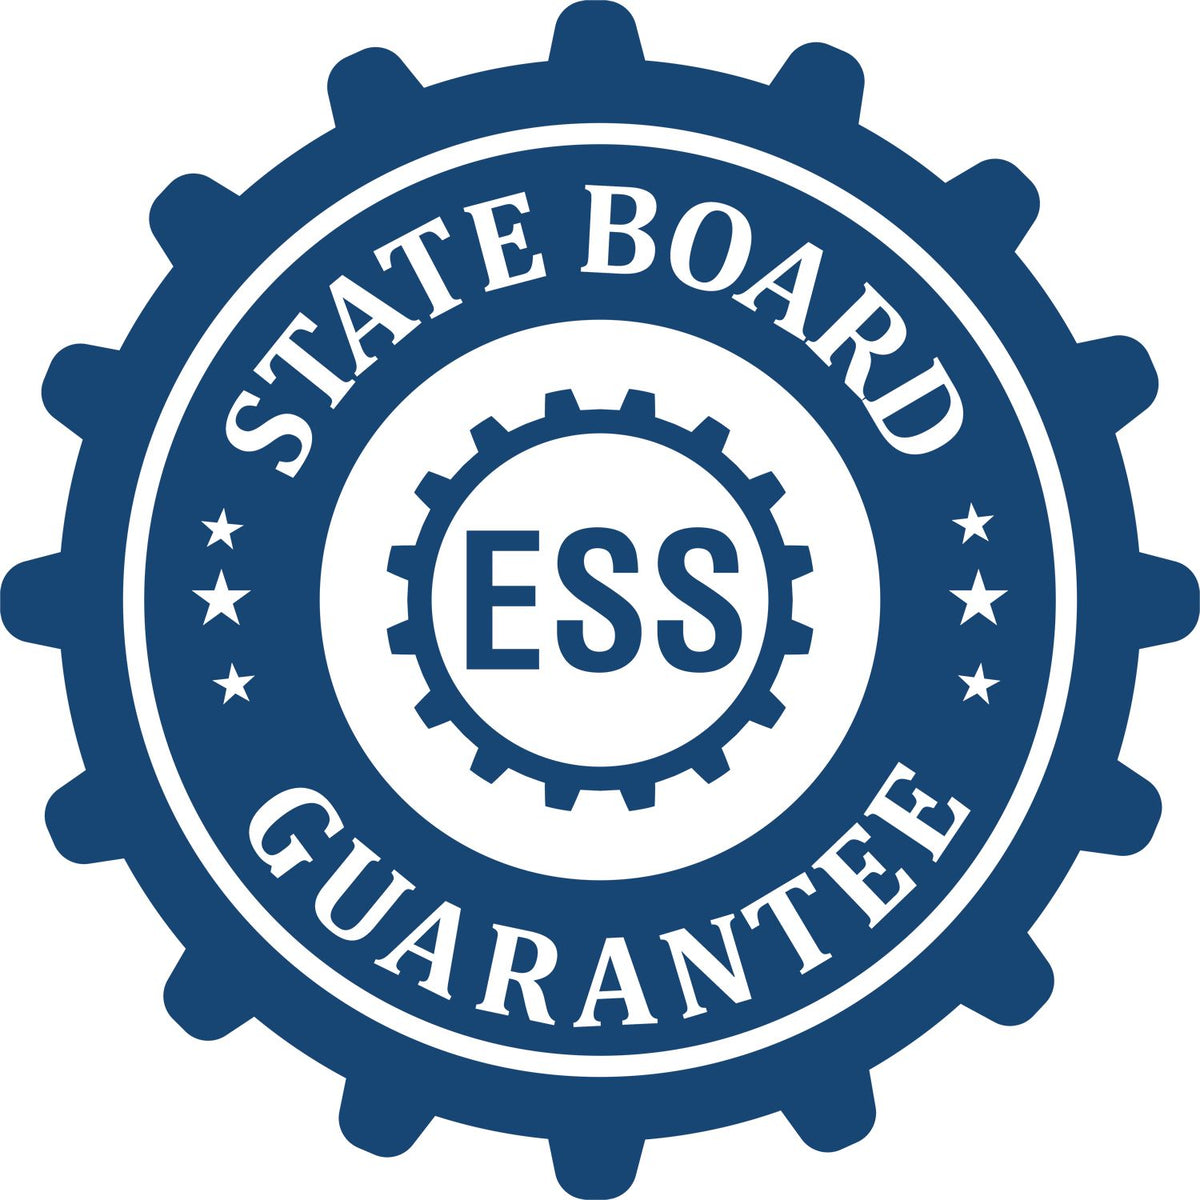 An emblem in a gear shape illustrating a state board guarantee for the State of Indiana Long Reach Architectural Embossing Seal product.